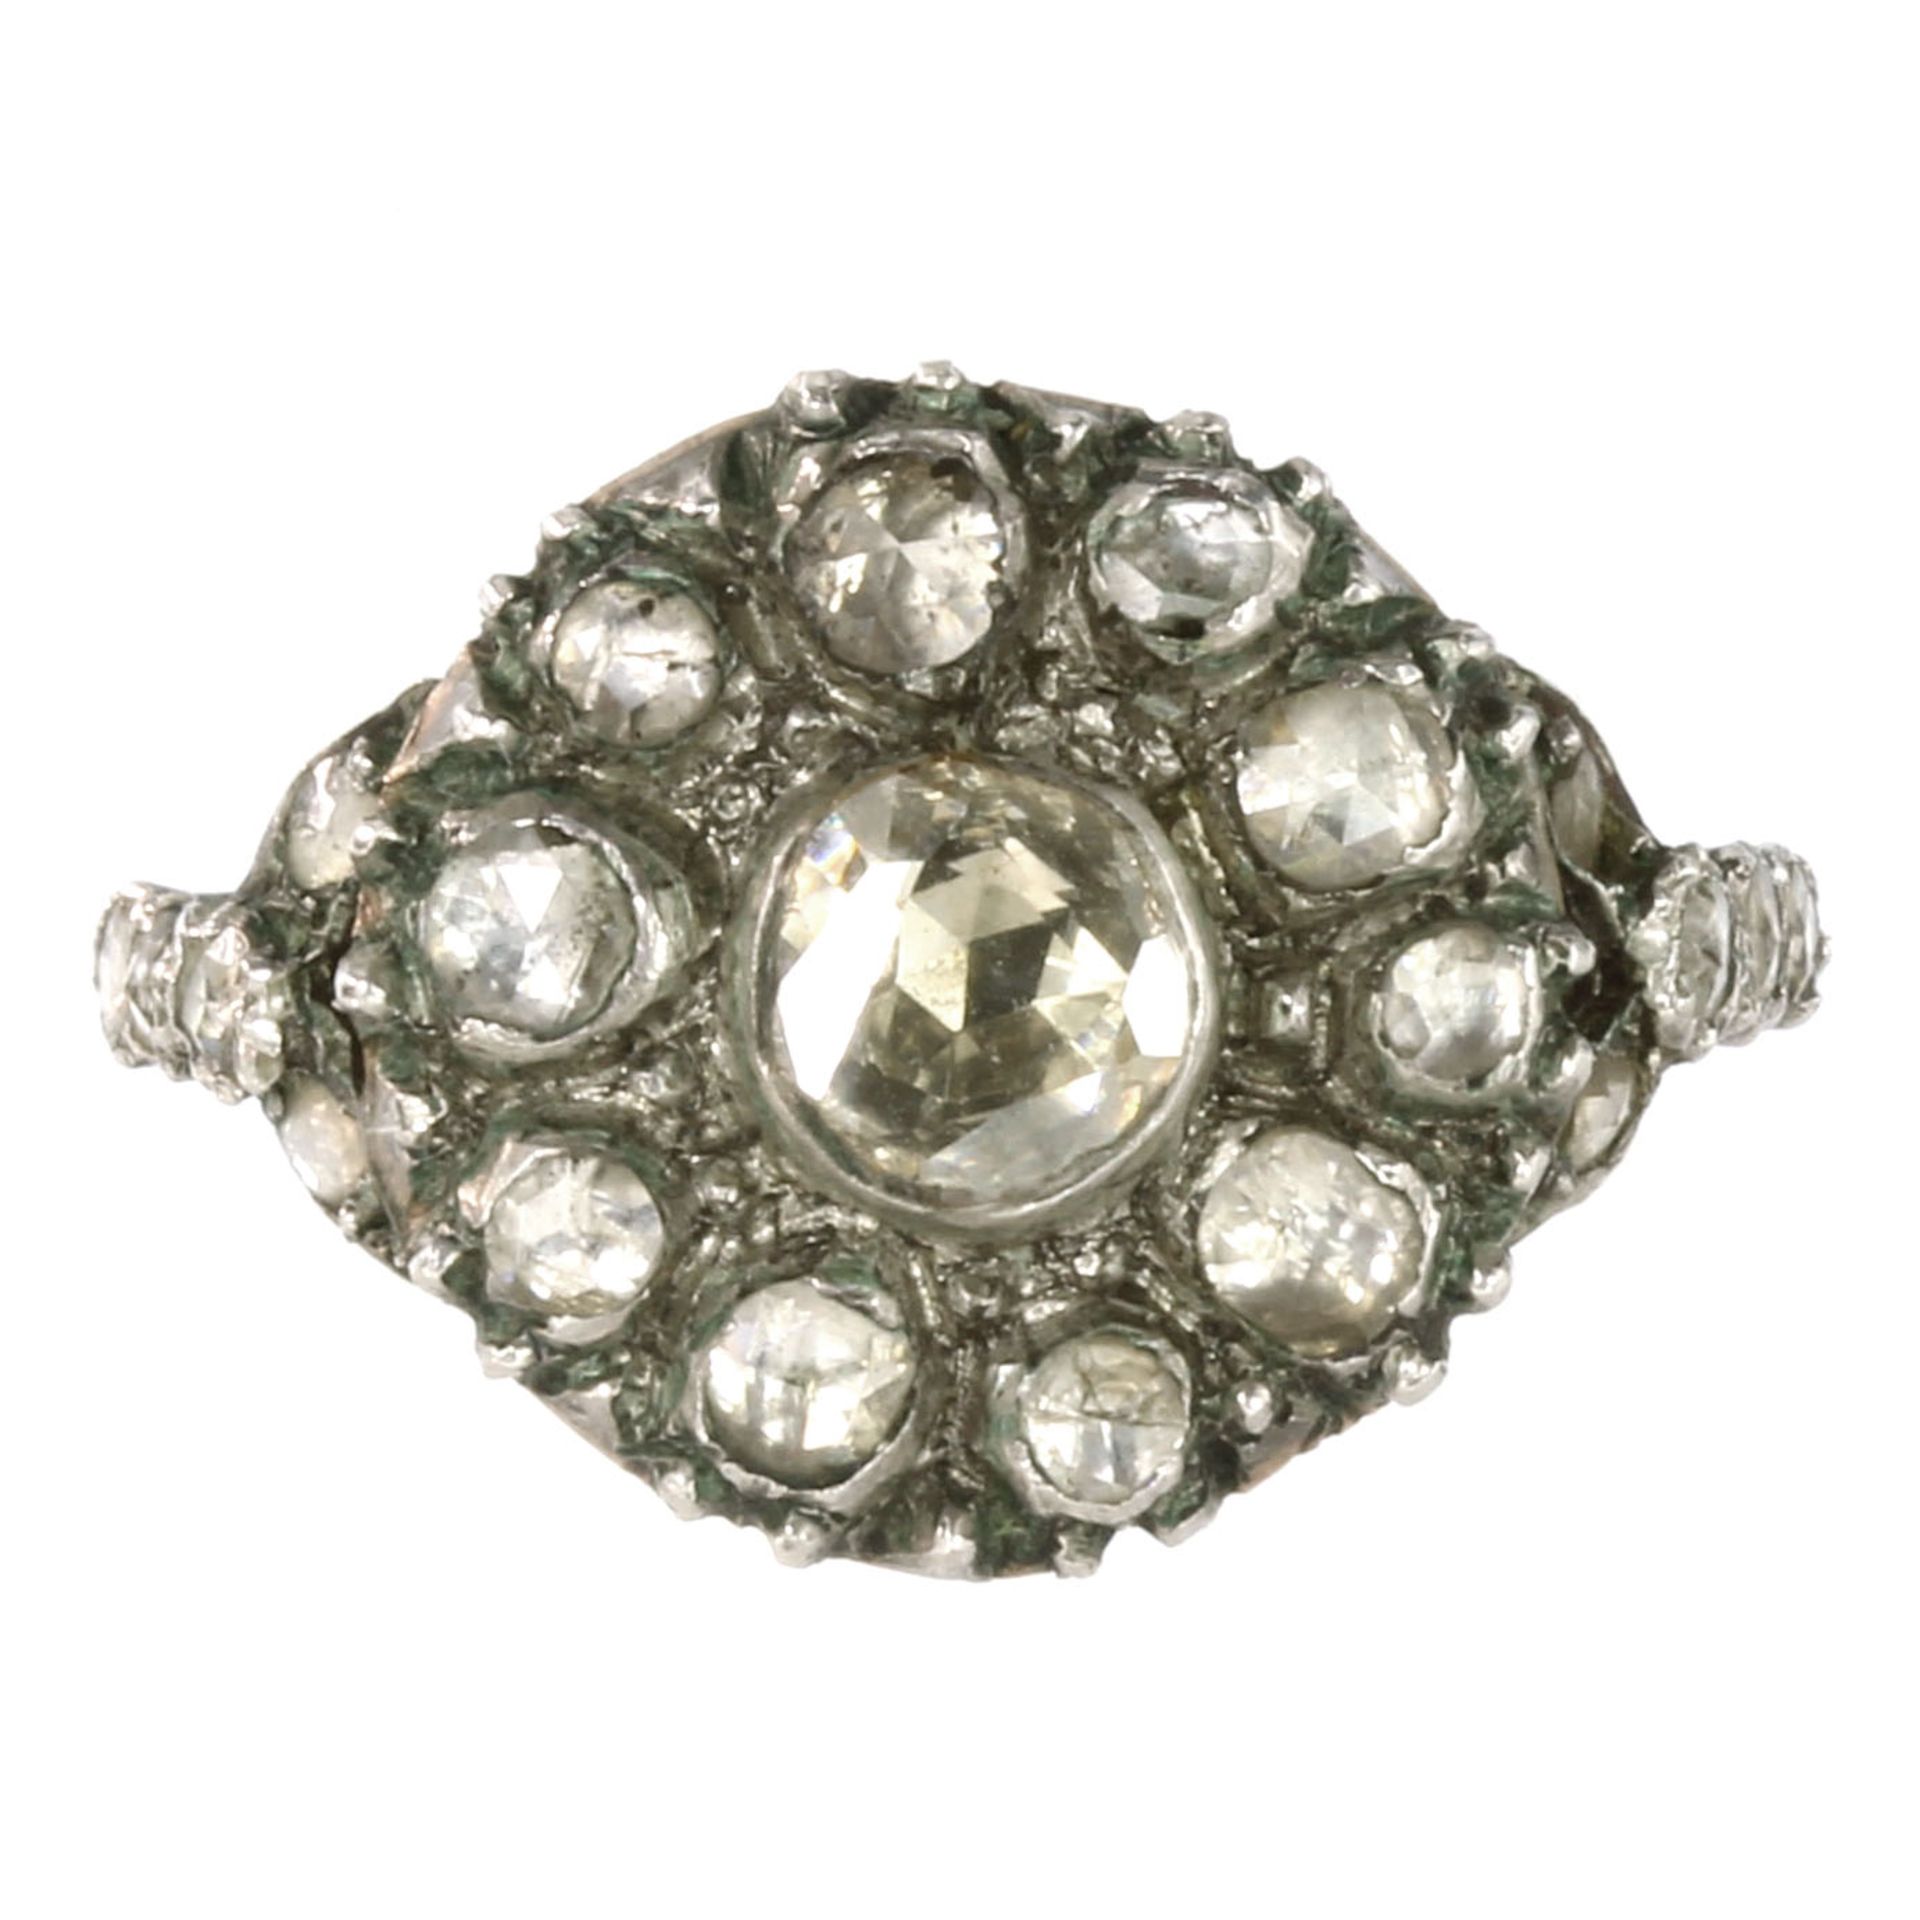 AN ANTIQUE DIAMOND CLUSTER RING in high carat yellow gold and silver set with a central rose cut